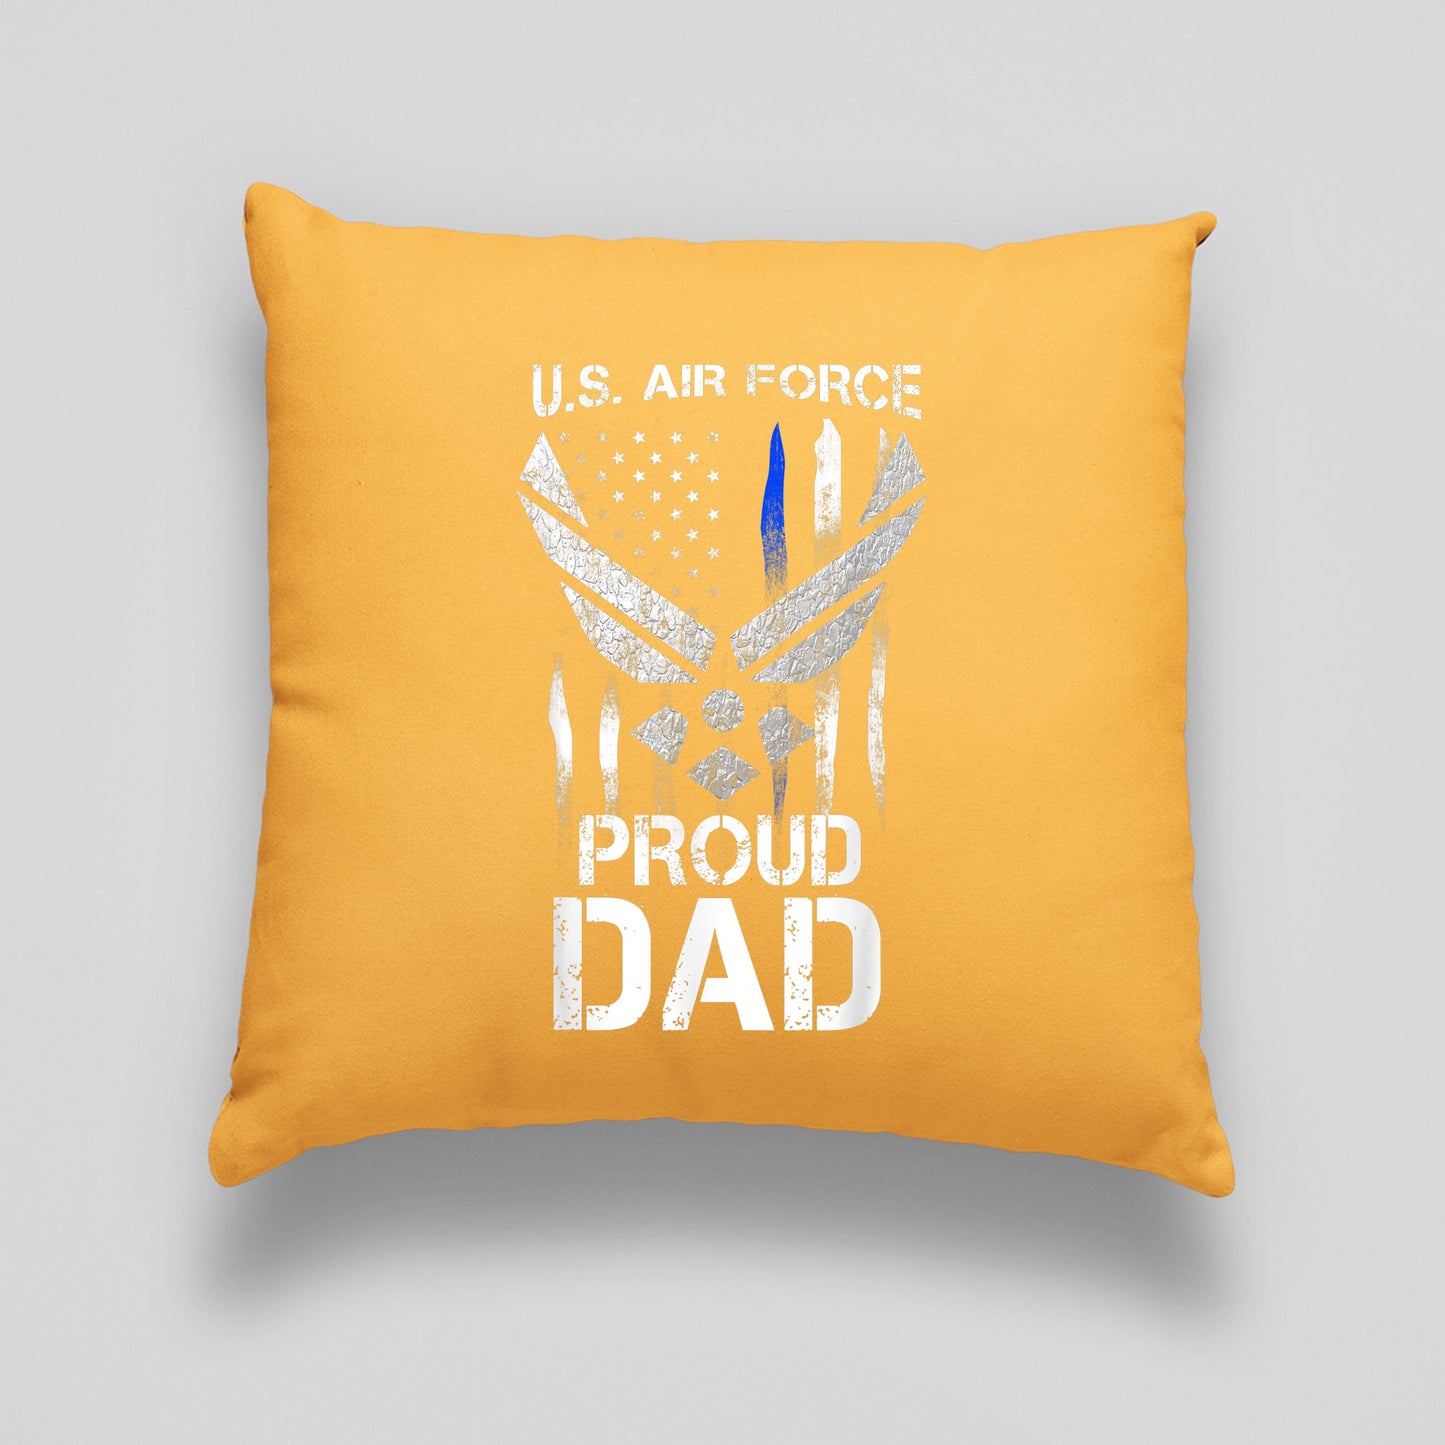 Memorial Day 2021, Pround Air Force Girlfriend Pillow, Air Force Dad Print Cushion, MustardFor Friend